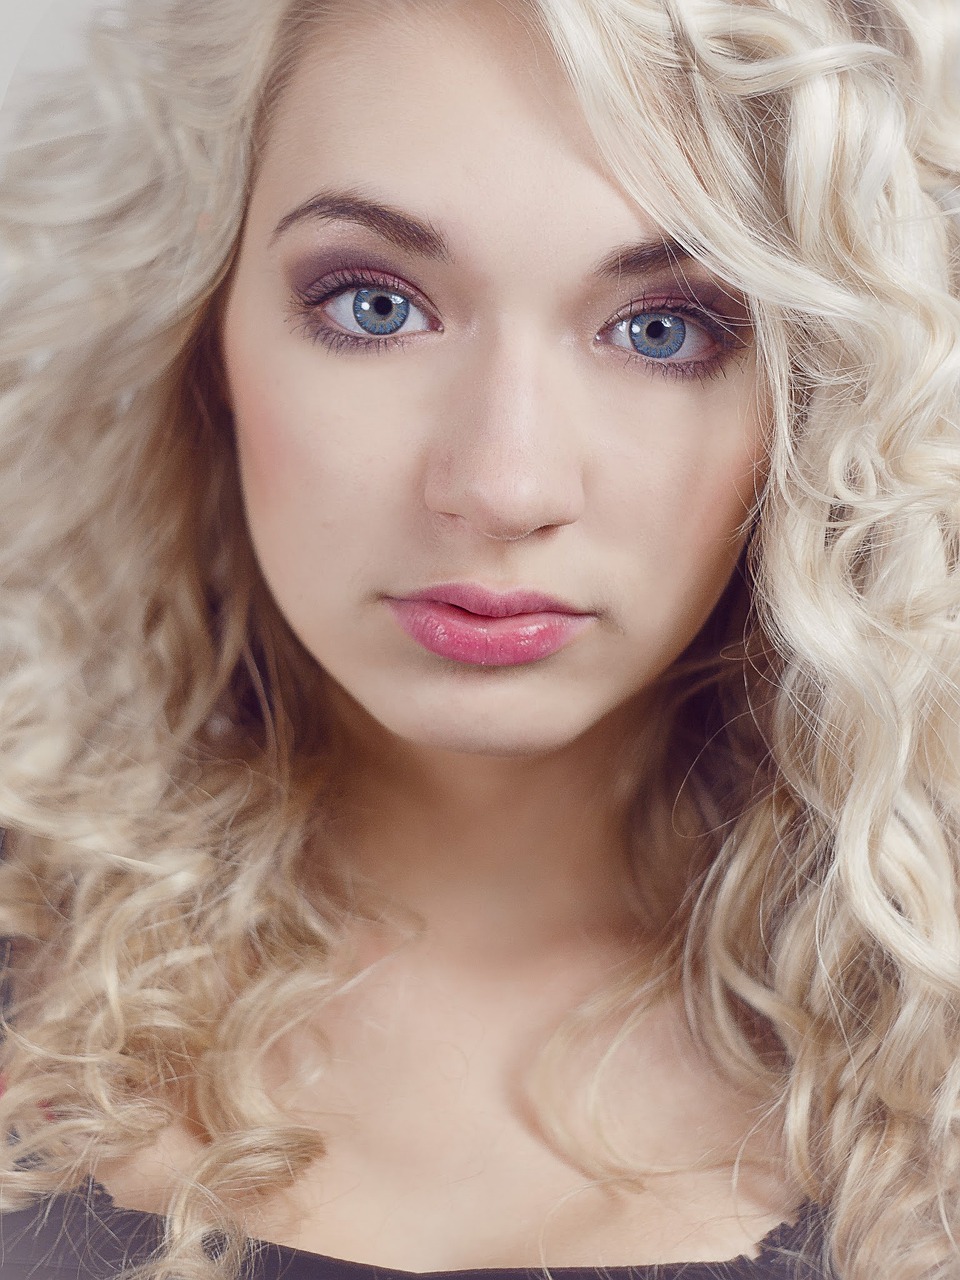 a close up of a woman with blonde hair, a portrait, by Maksimilijan Vanka, flickr, curly blond, pretty blueeyes, music video, commercial photo